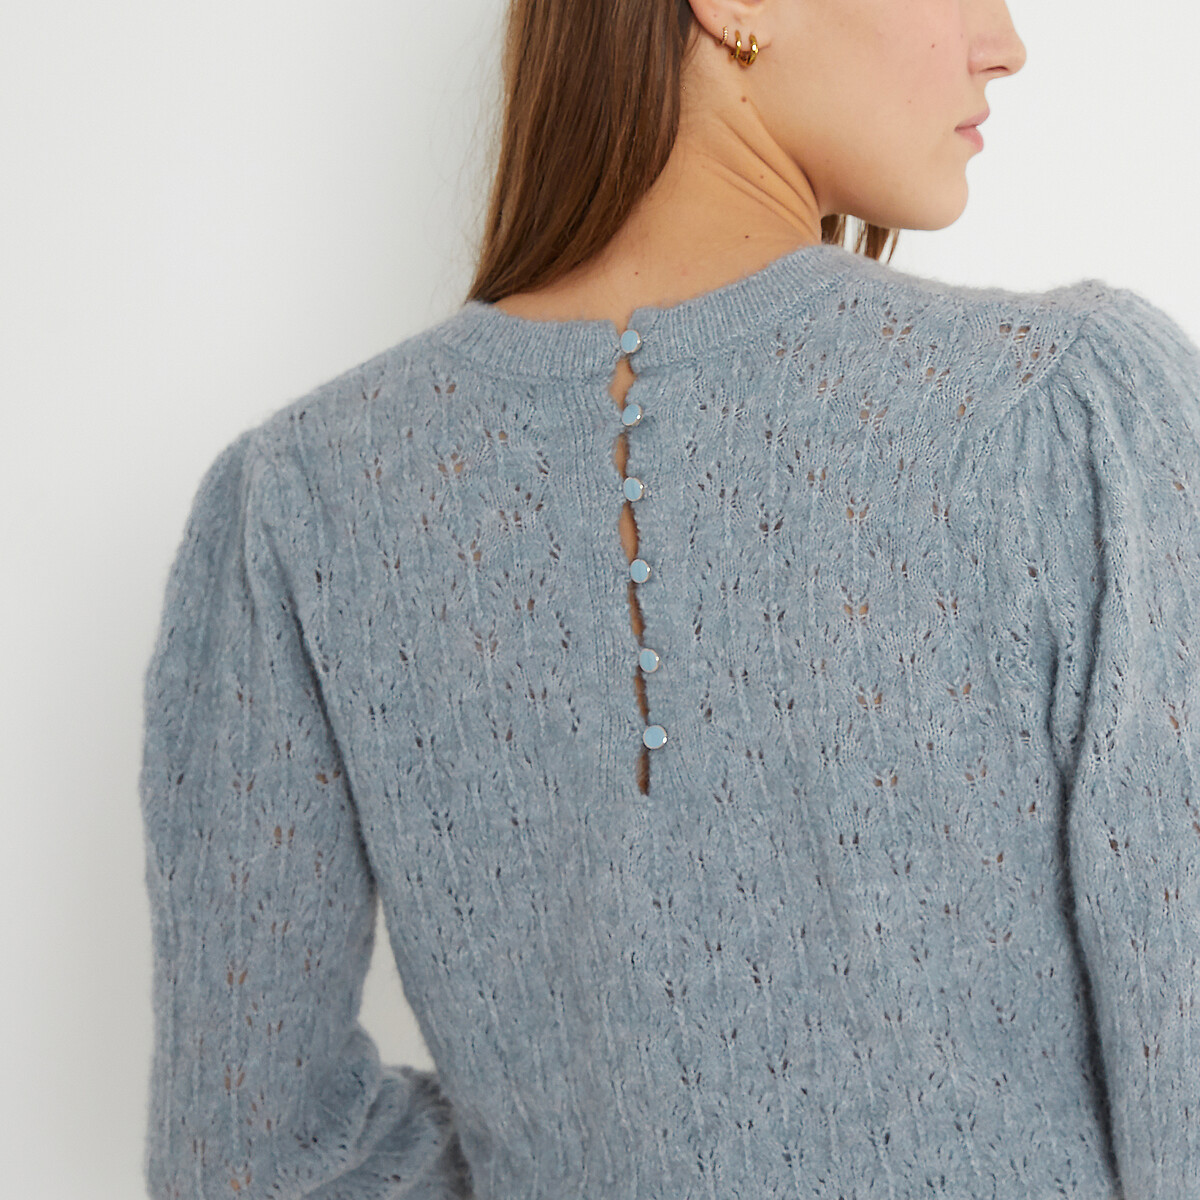 Pointelle Knit Jumper with Crew Neck